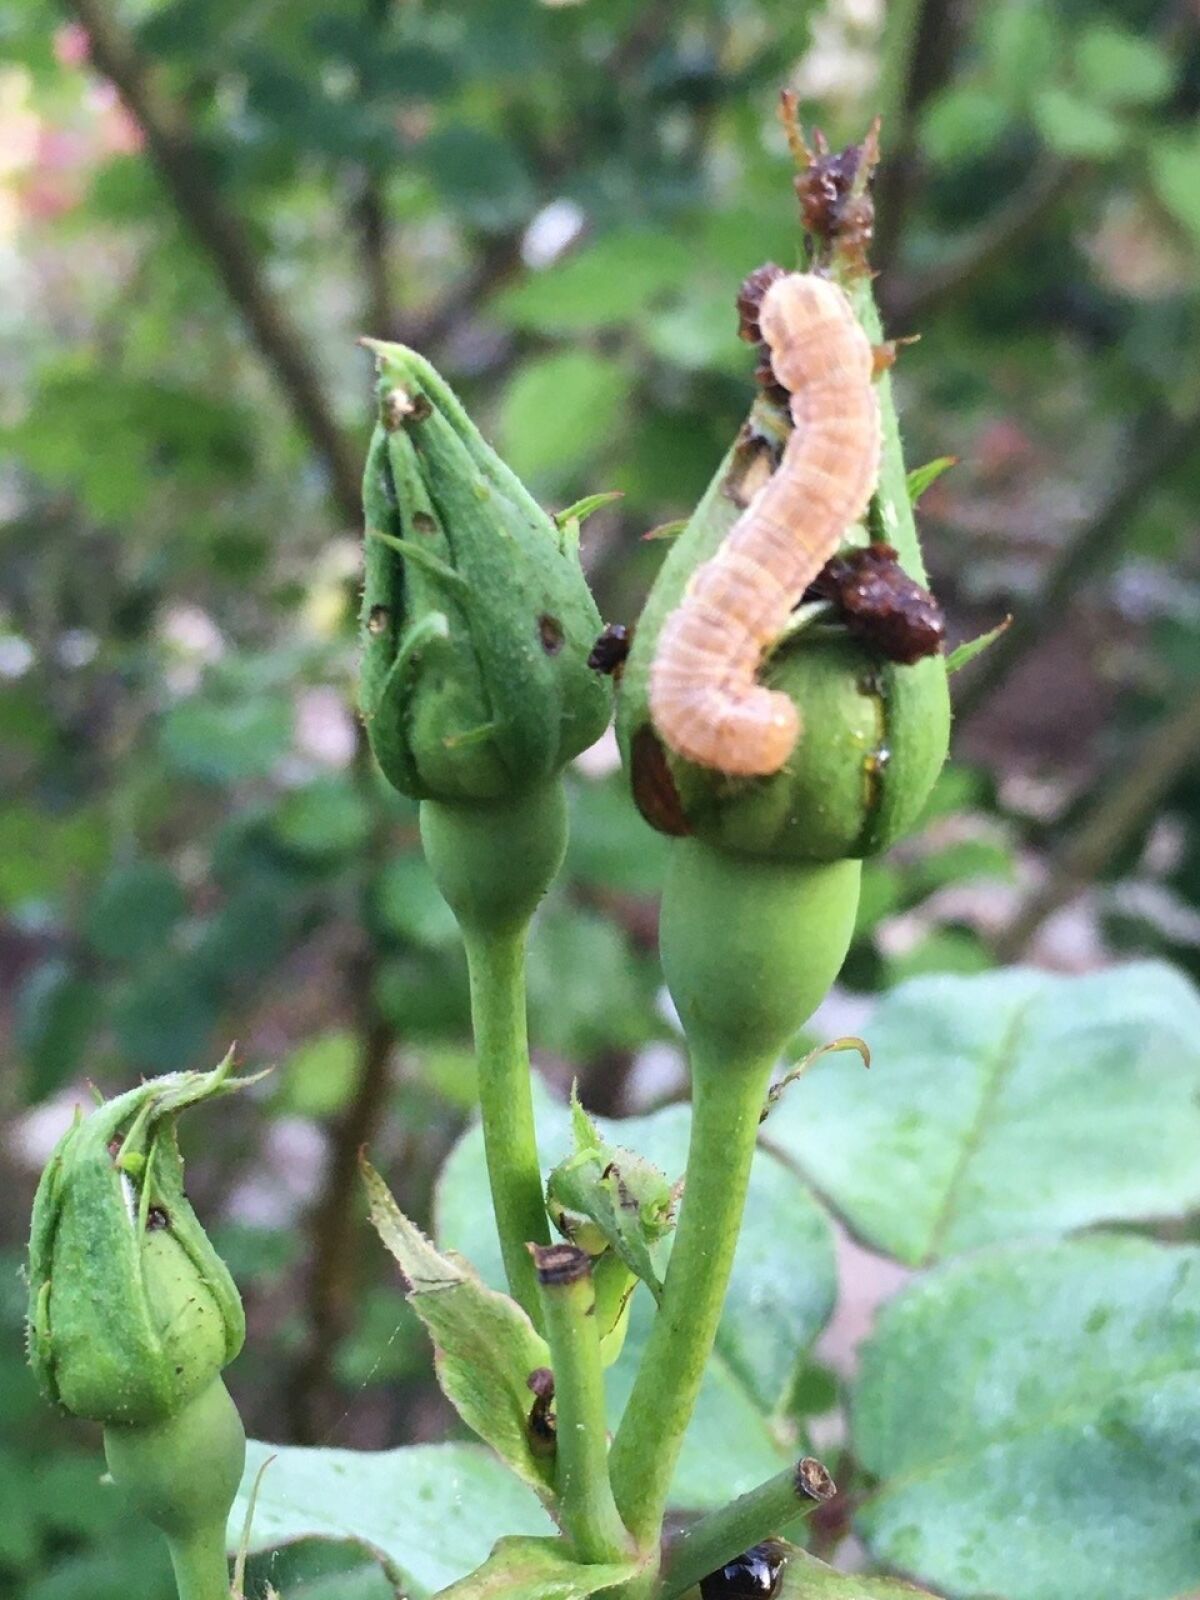 Budworms bore single holes into buds and consume the developing petals, preventing the rose from opening properly.